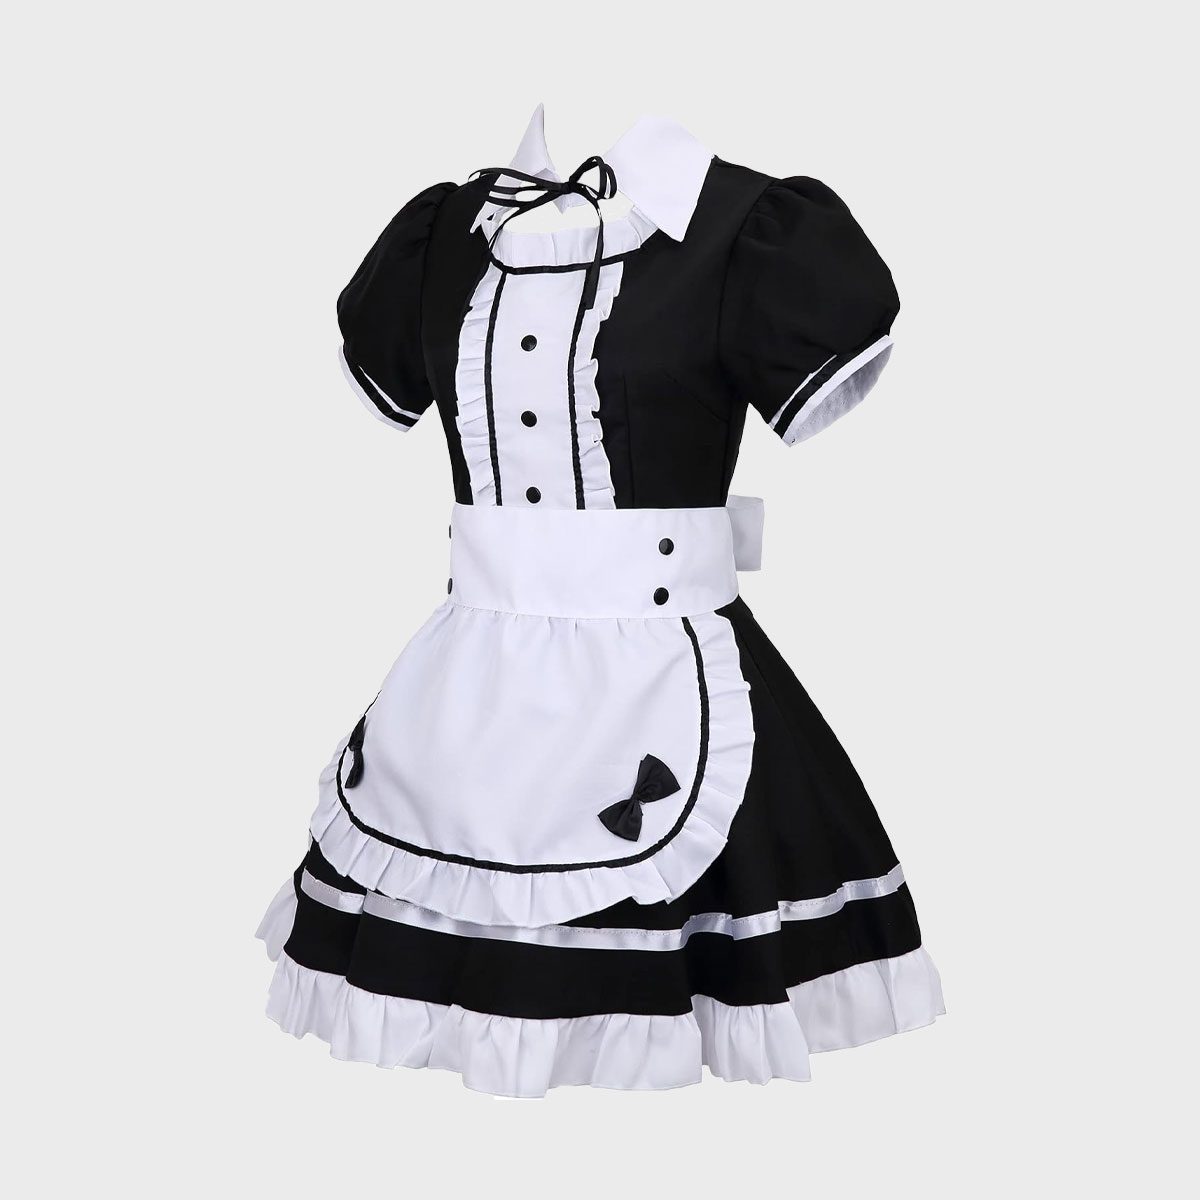 Colorful House Women's Cosplay French Apron Maid Fancy Dress Costume Ecomm Via Amazon.com